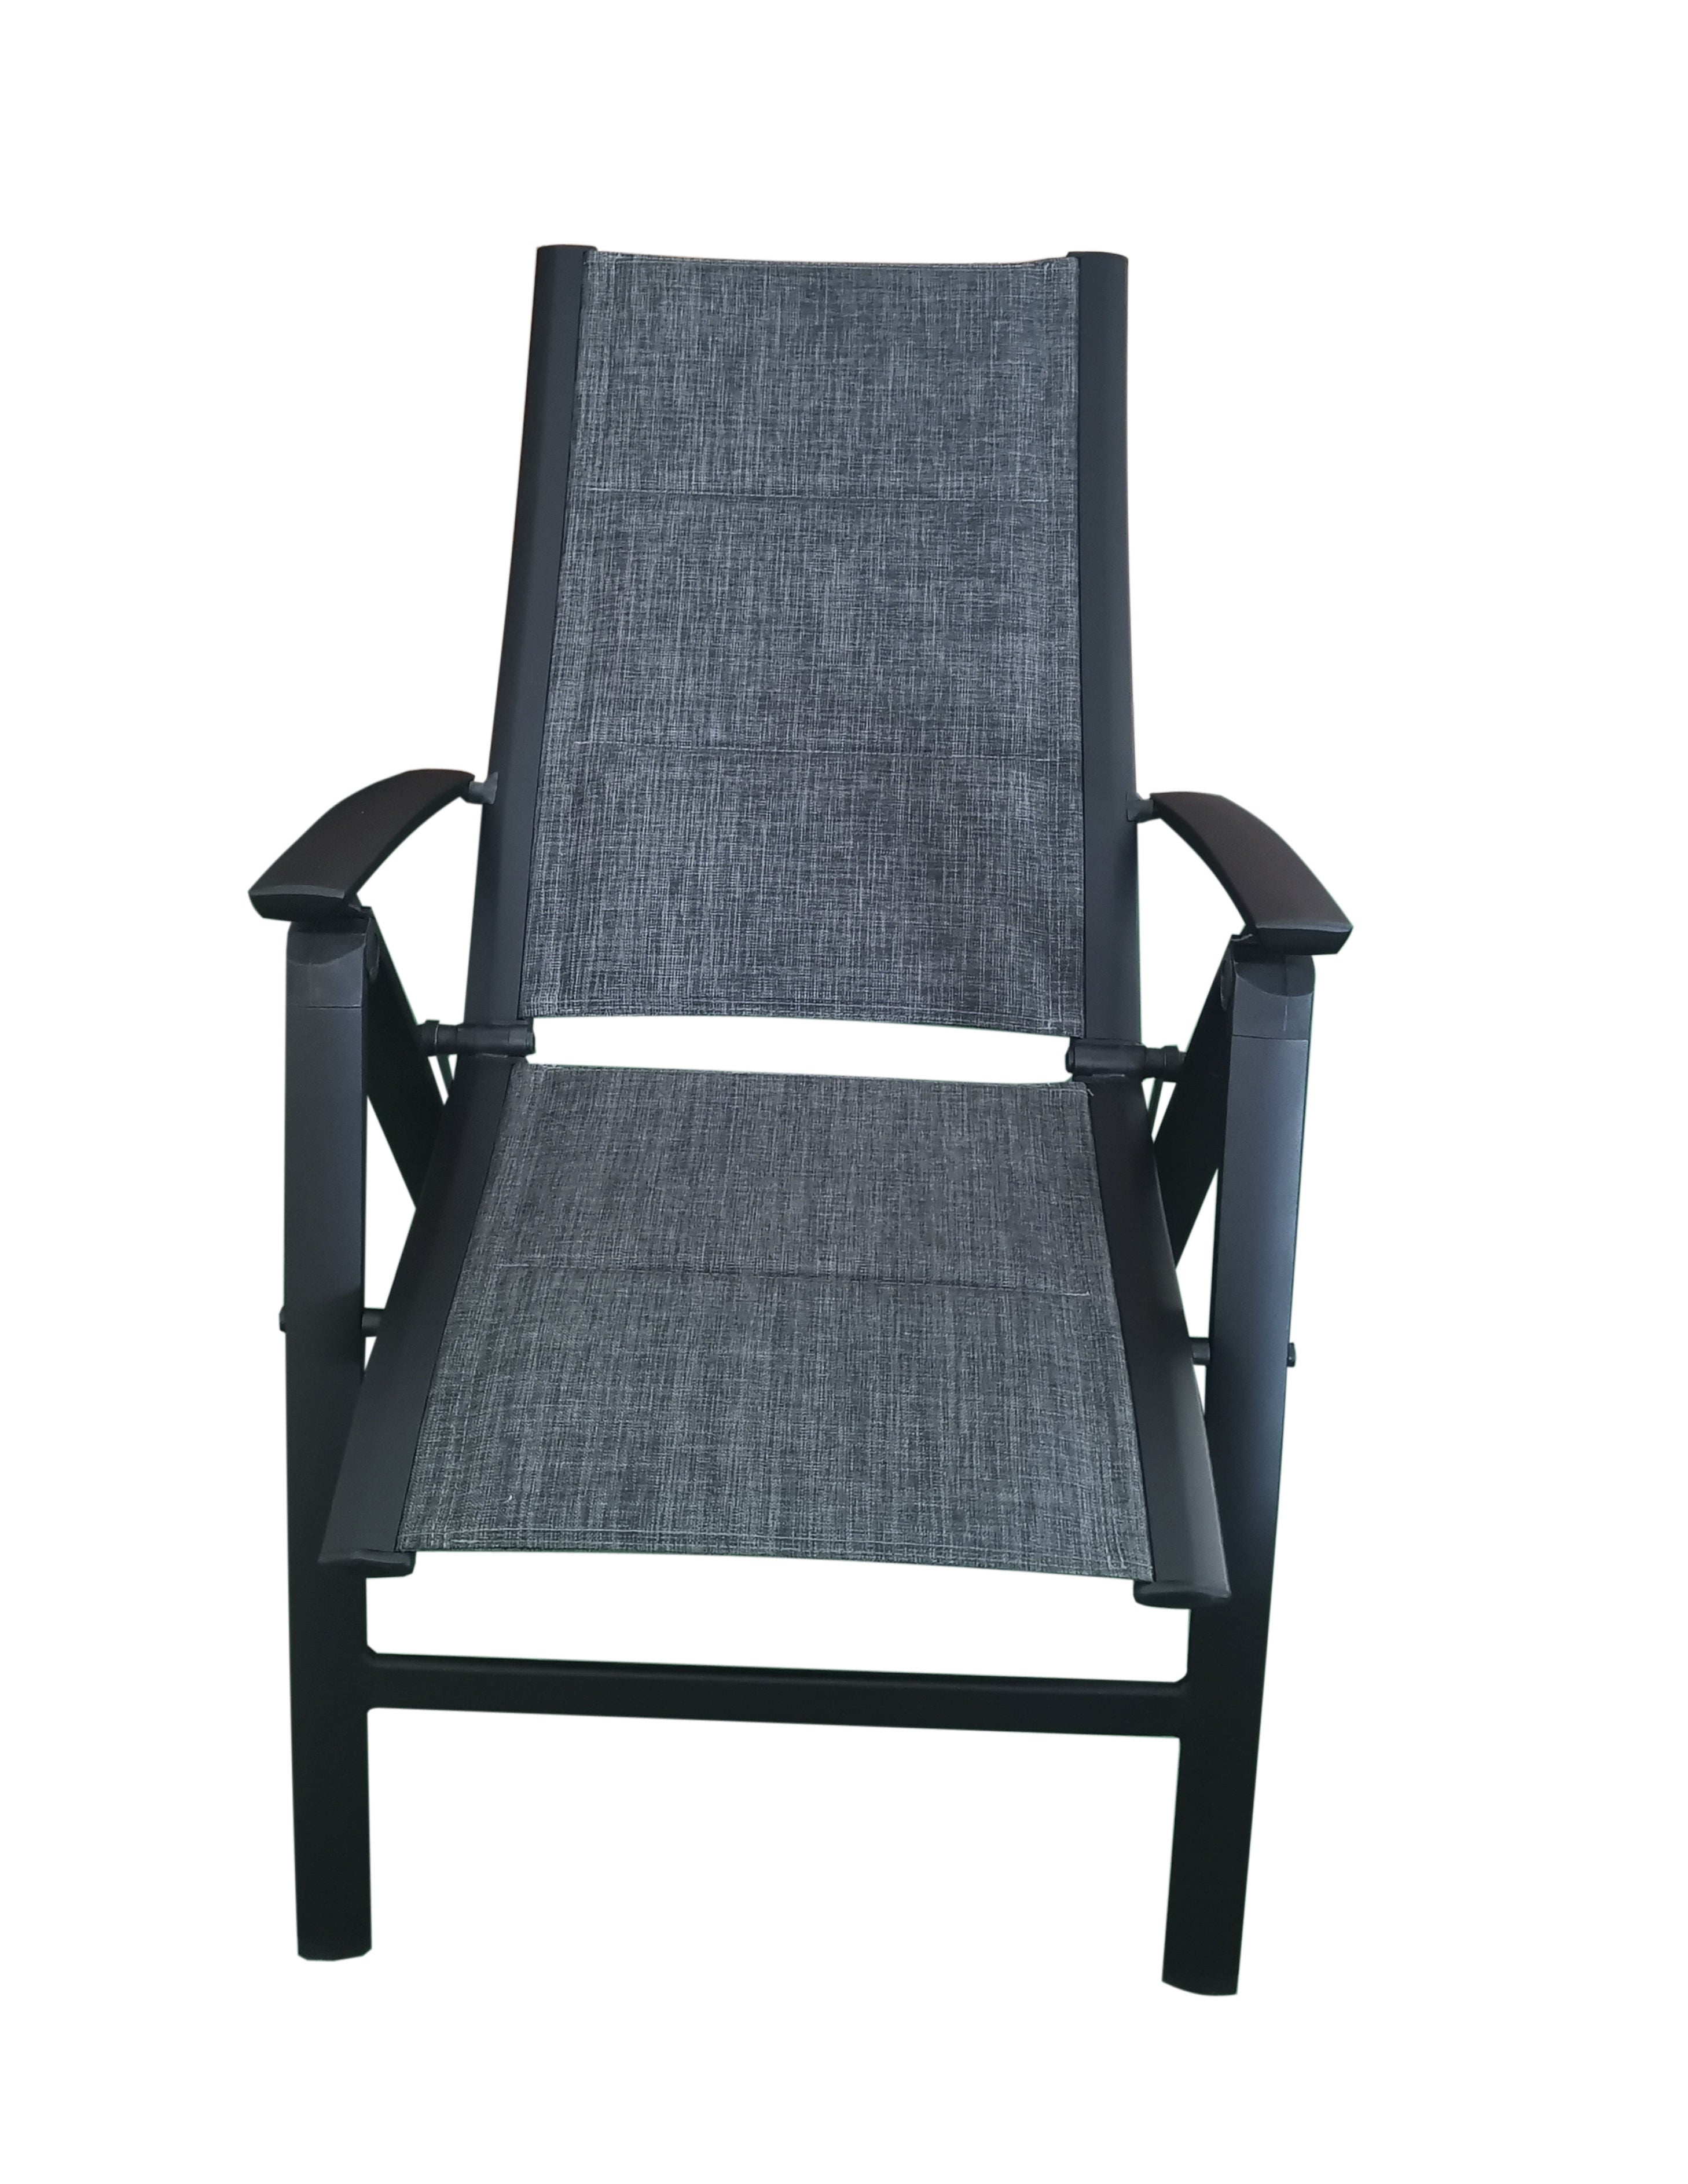 PatioZone Reclining Armchair with Quick-Dry Textilene and Aluminum Frame (MOSS-0438NC) - Black / Charcoal